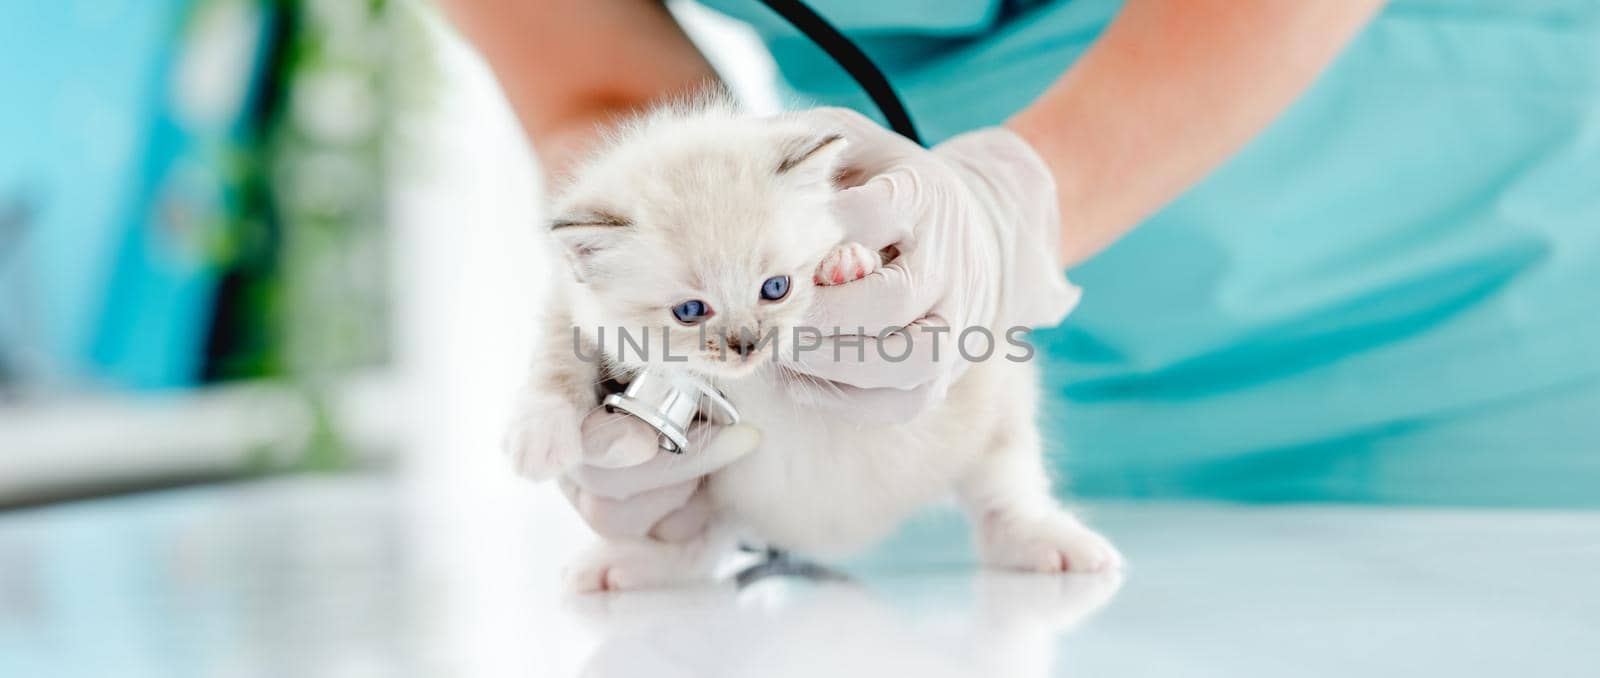 Woman veterinarian holding cute ragdoll kitten and examining its heart during medical care at vet clinic. Portrait of adorable fluffy purebred kitten in animal hospital